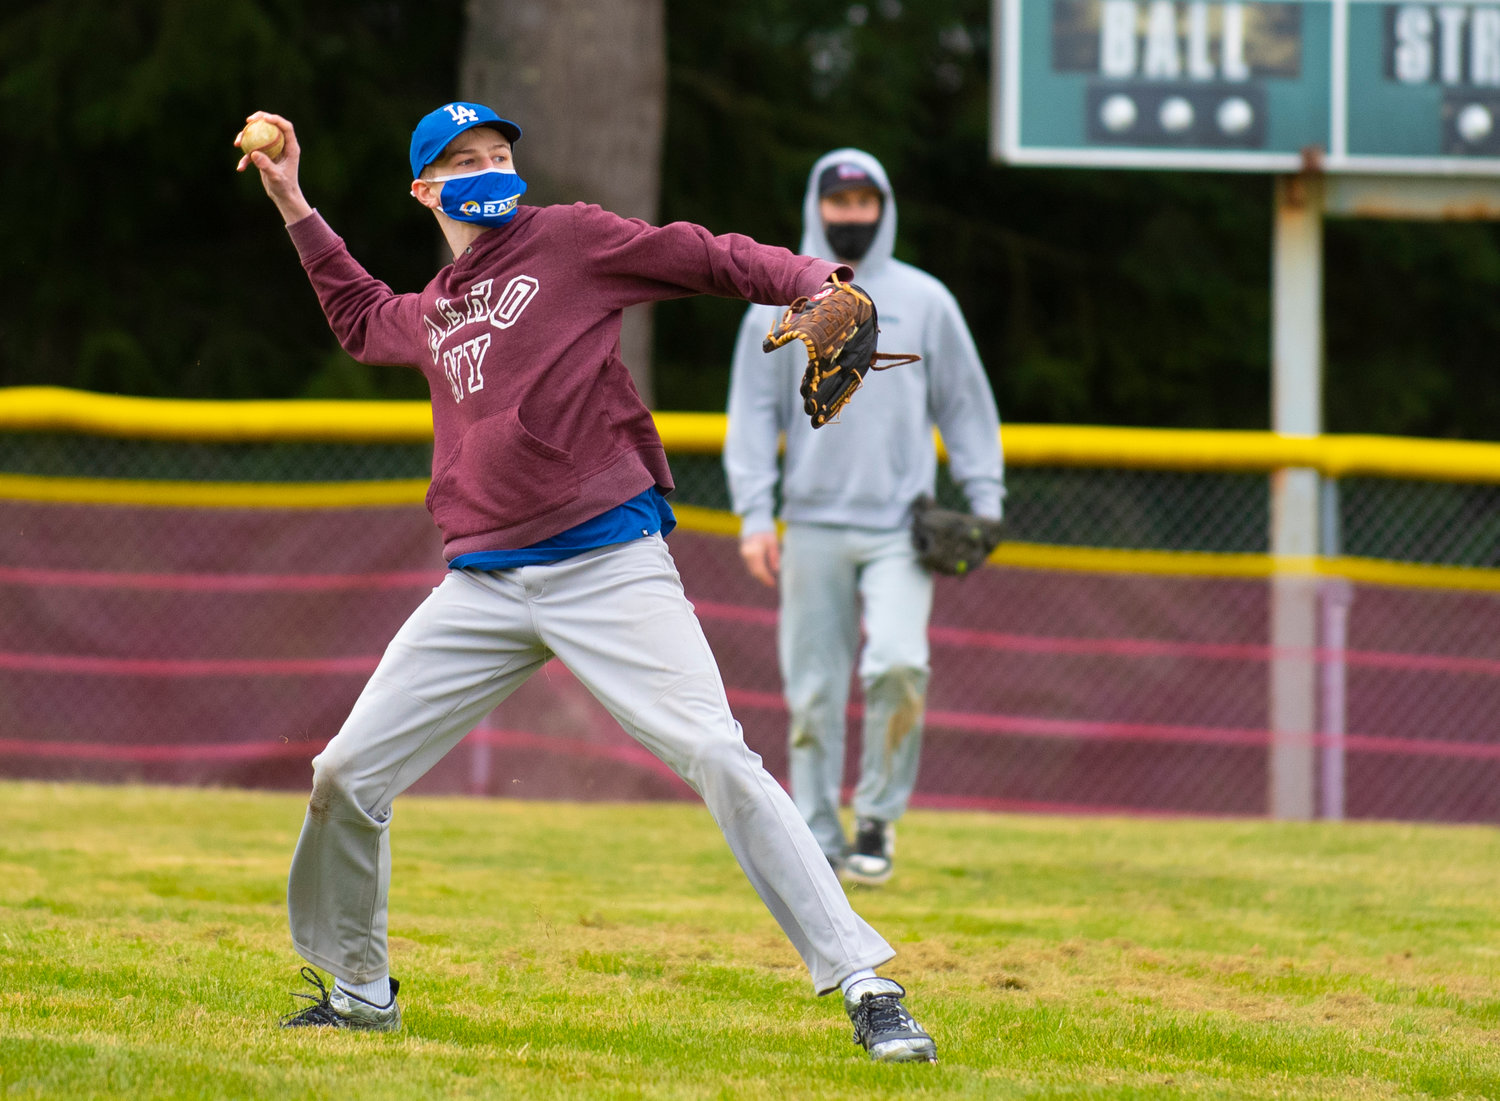 Winlock's Tallen Lofgren launches a throw from left field during the Cardinals' practice on March 19.